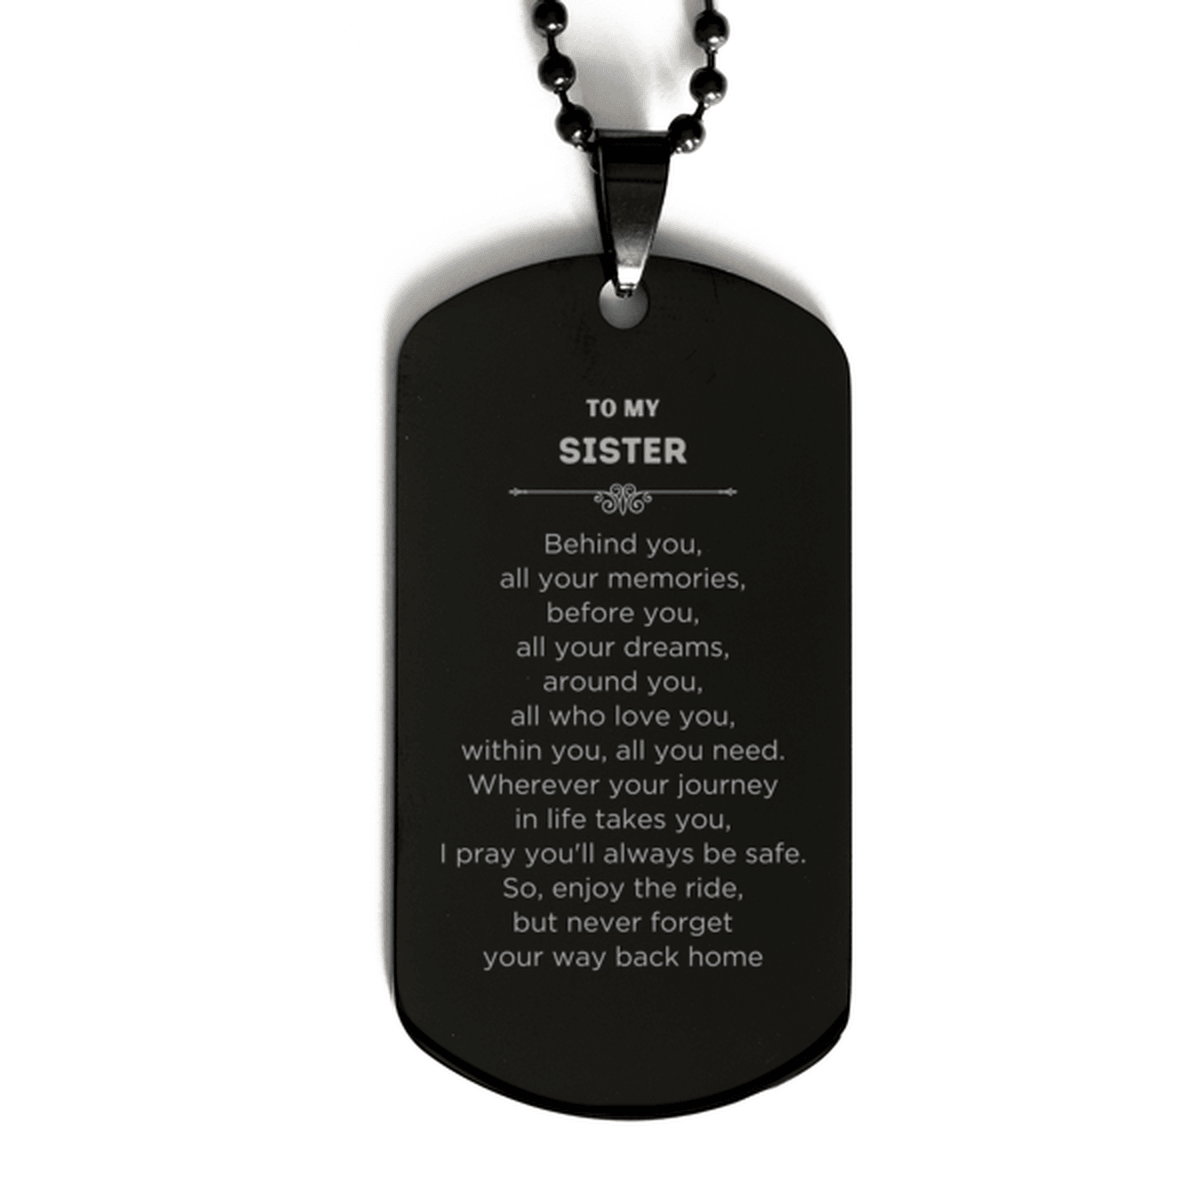 Sister Black Dog Tag Necklace Birthday Christmas Unique Gifts Behind you, all your memories, before you, all your dreams - Mallard Moon Gift Shop